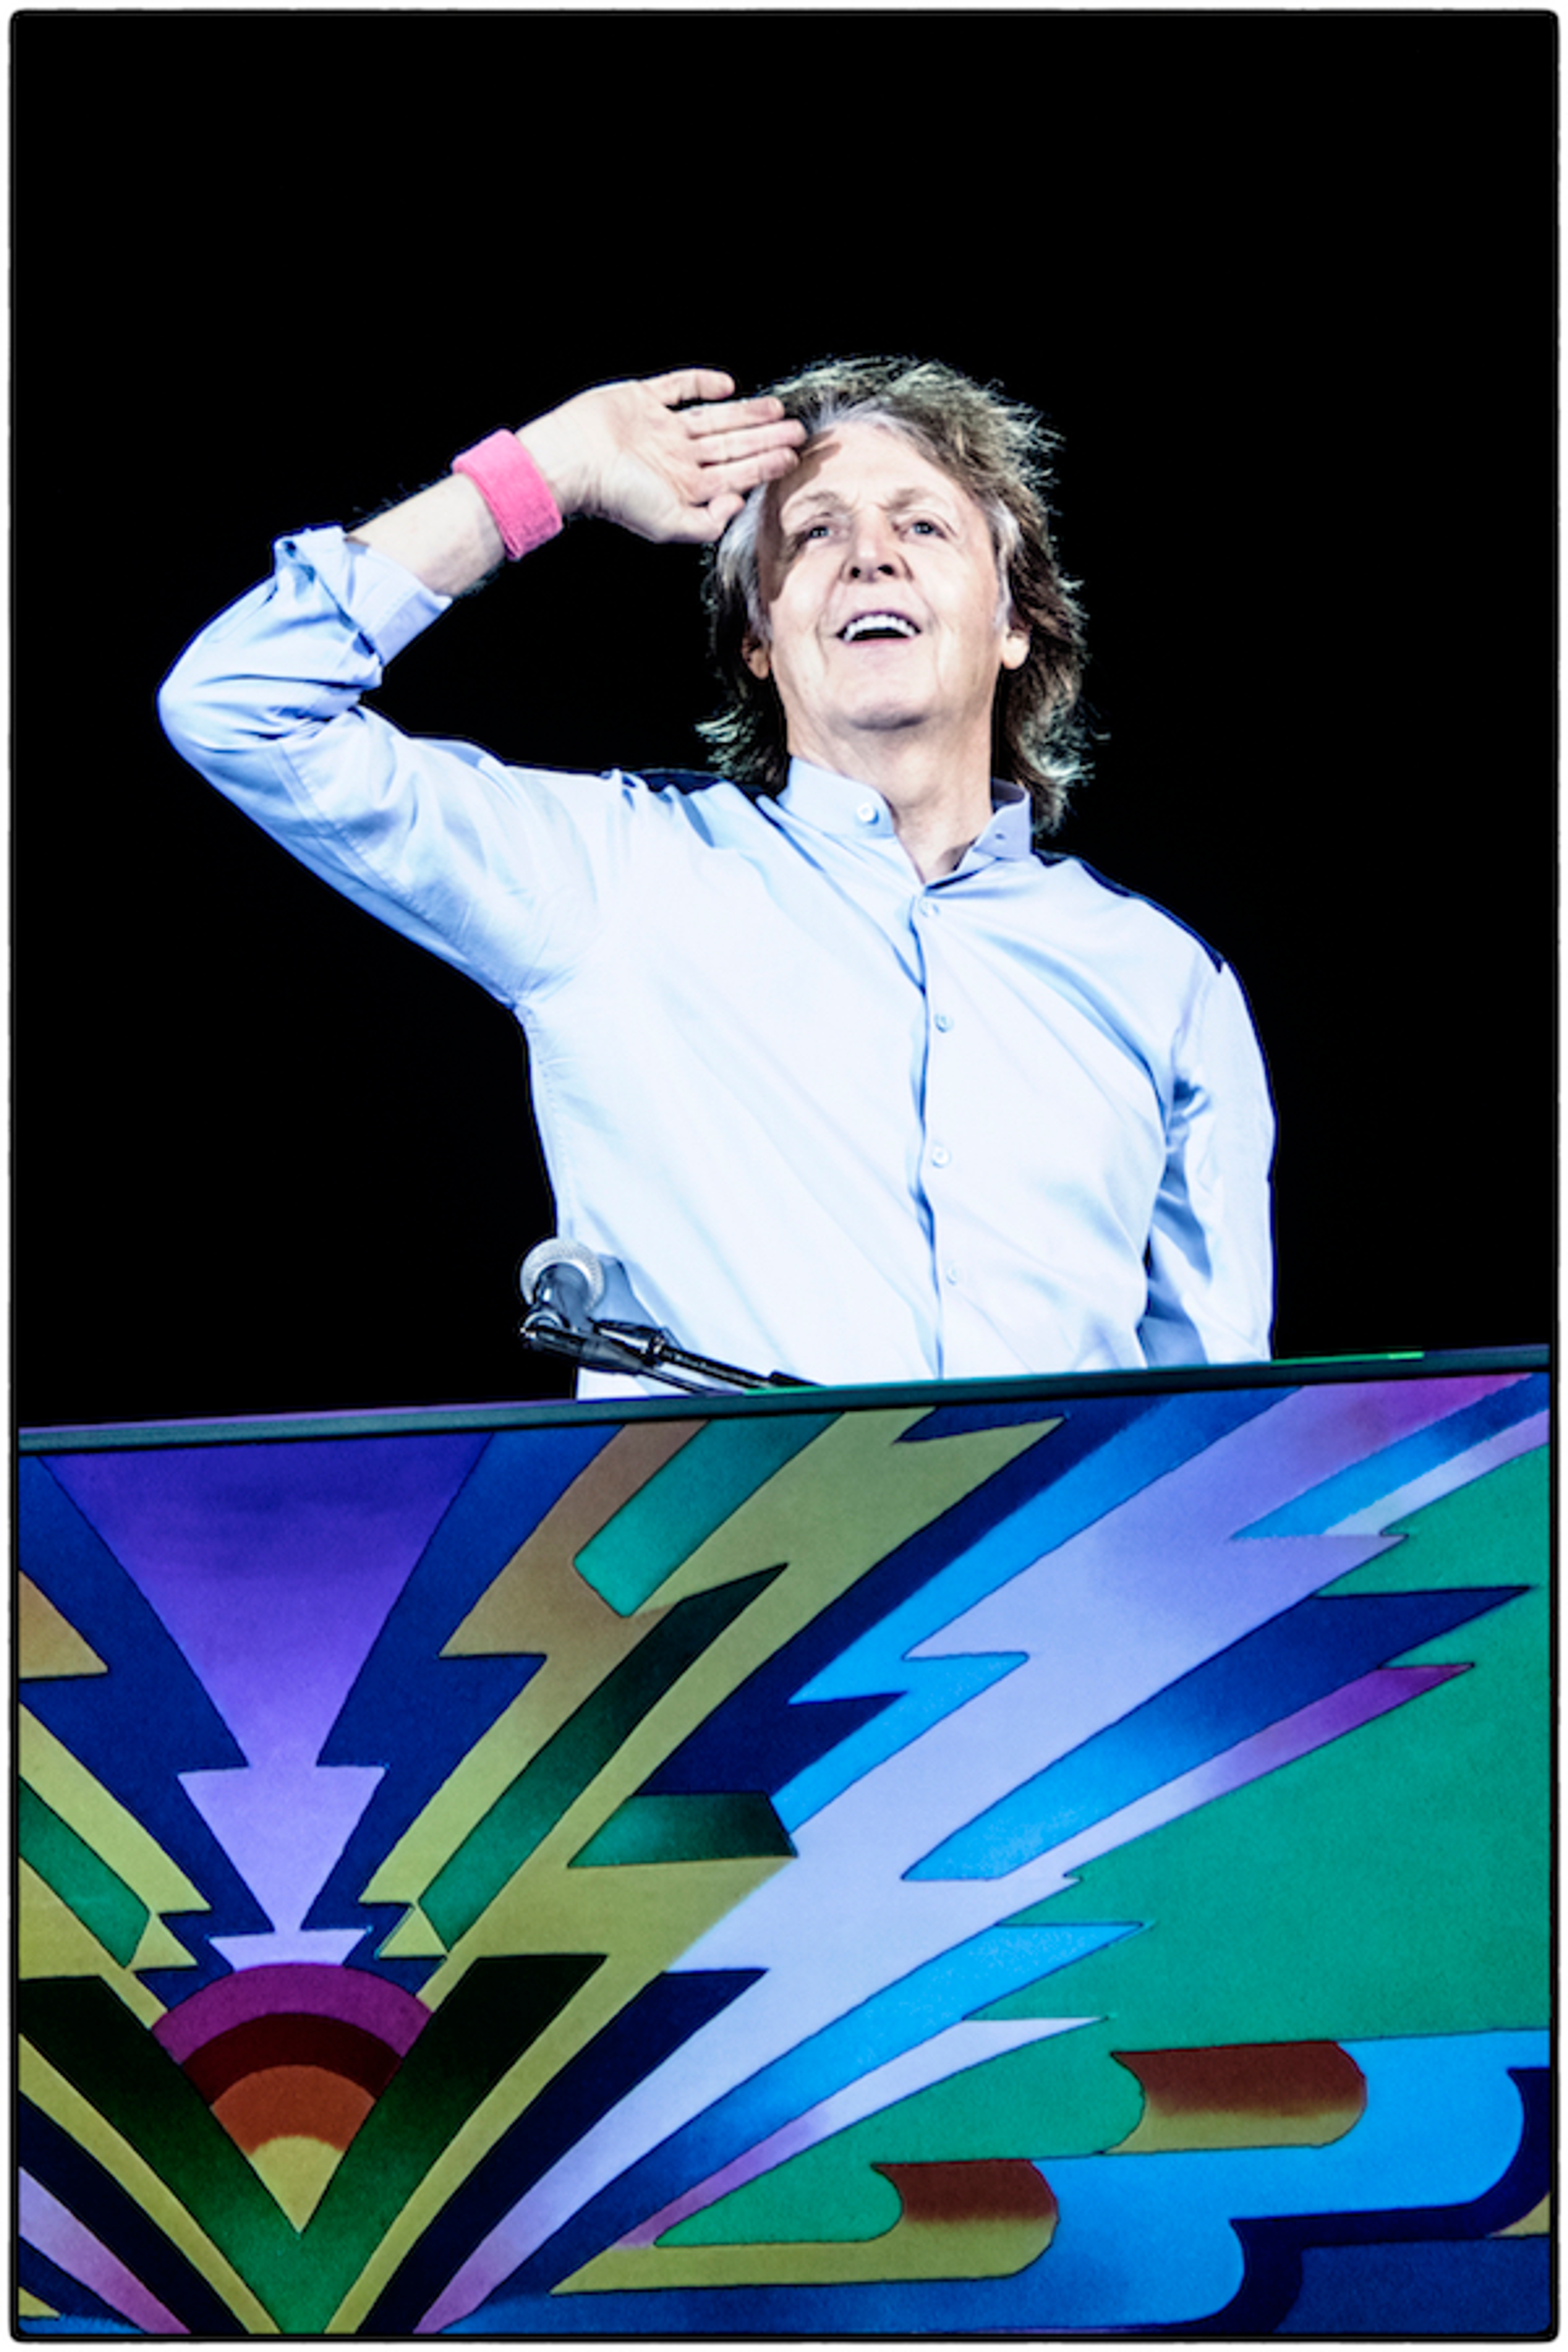 Paul McCartney and his band support Breast Cancer Awareness Month